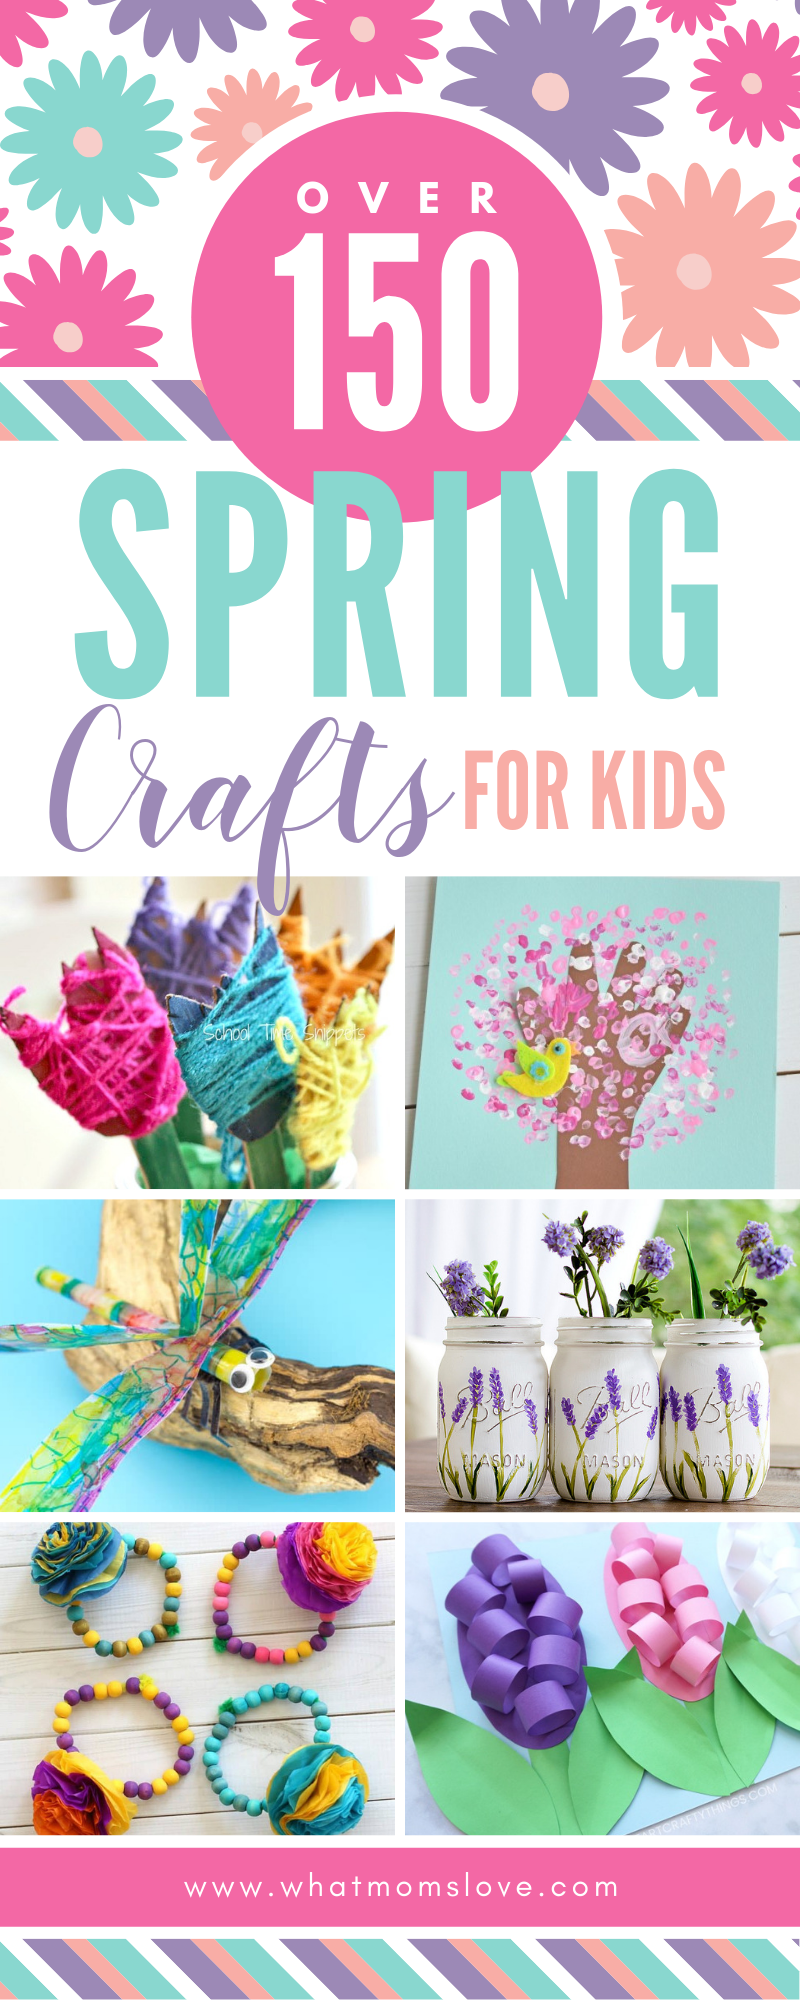 The Epic Collection Of Spring Crafts For Kids - All The Best Art Projects & Activities To Celebrate The Season -   19 simple crafts kindergarten ideas